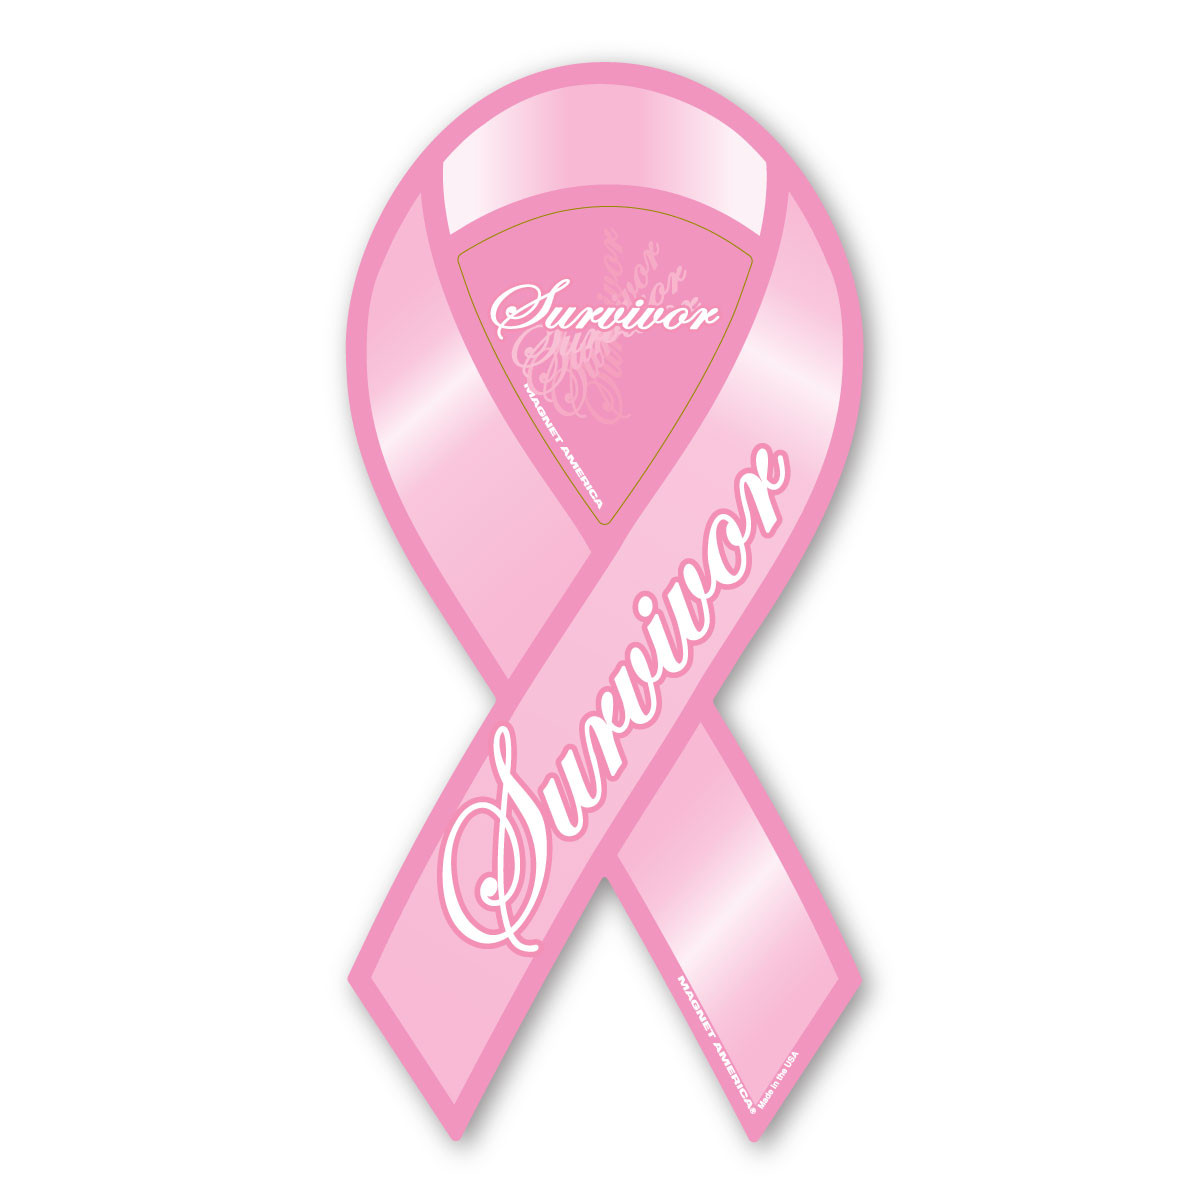 The story behind the breast cancer pink ribbon